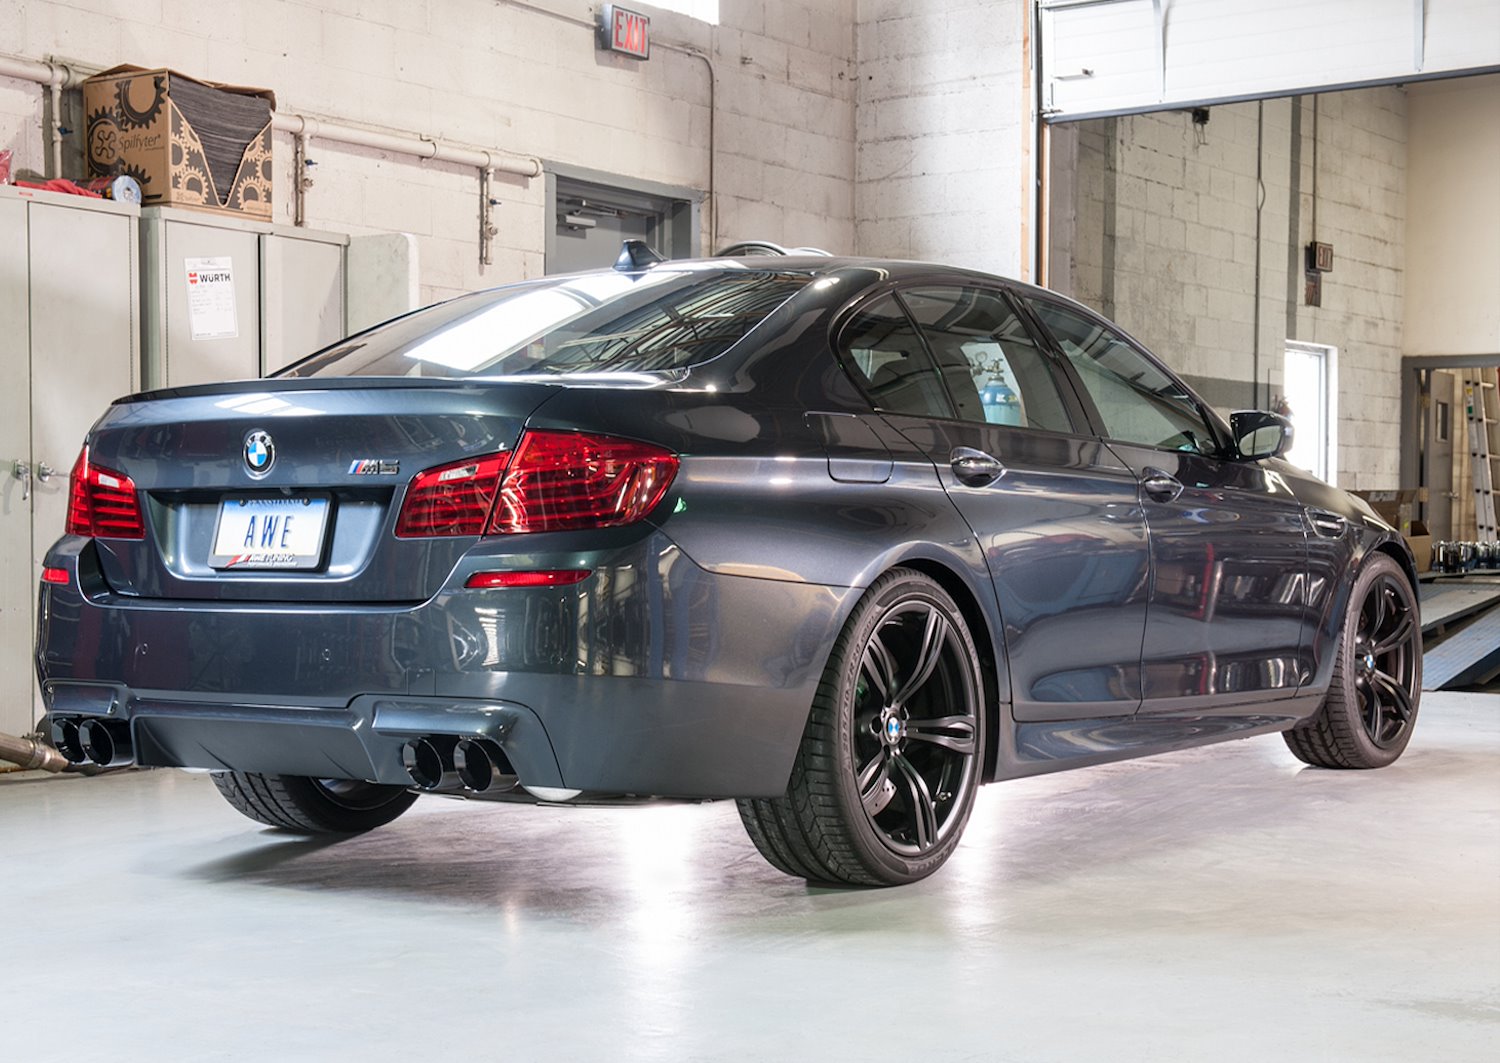 AWE Touring Edition Axle Back Exhaust for BMW F10 M5, Diamond Black Tips